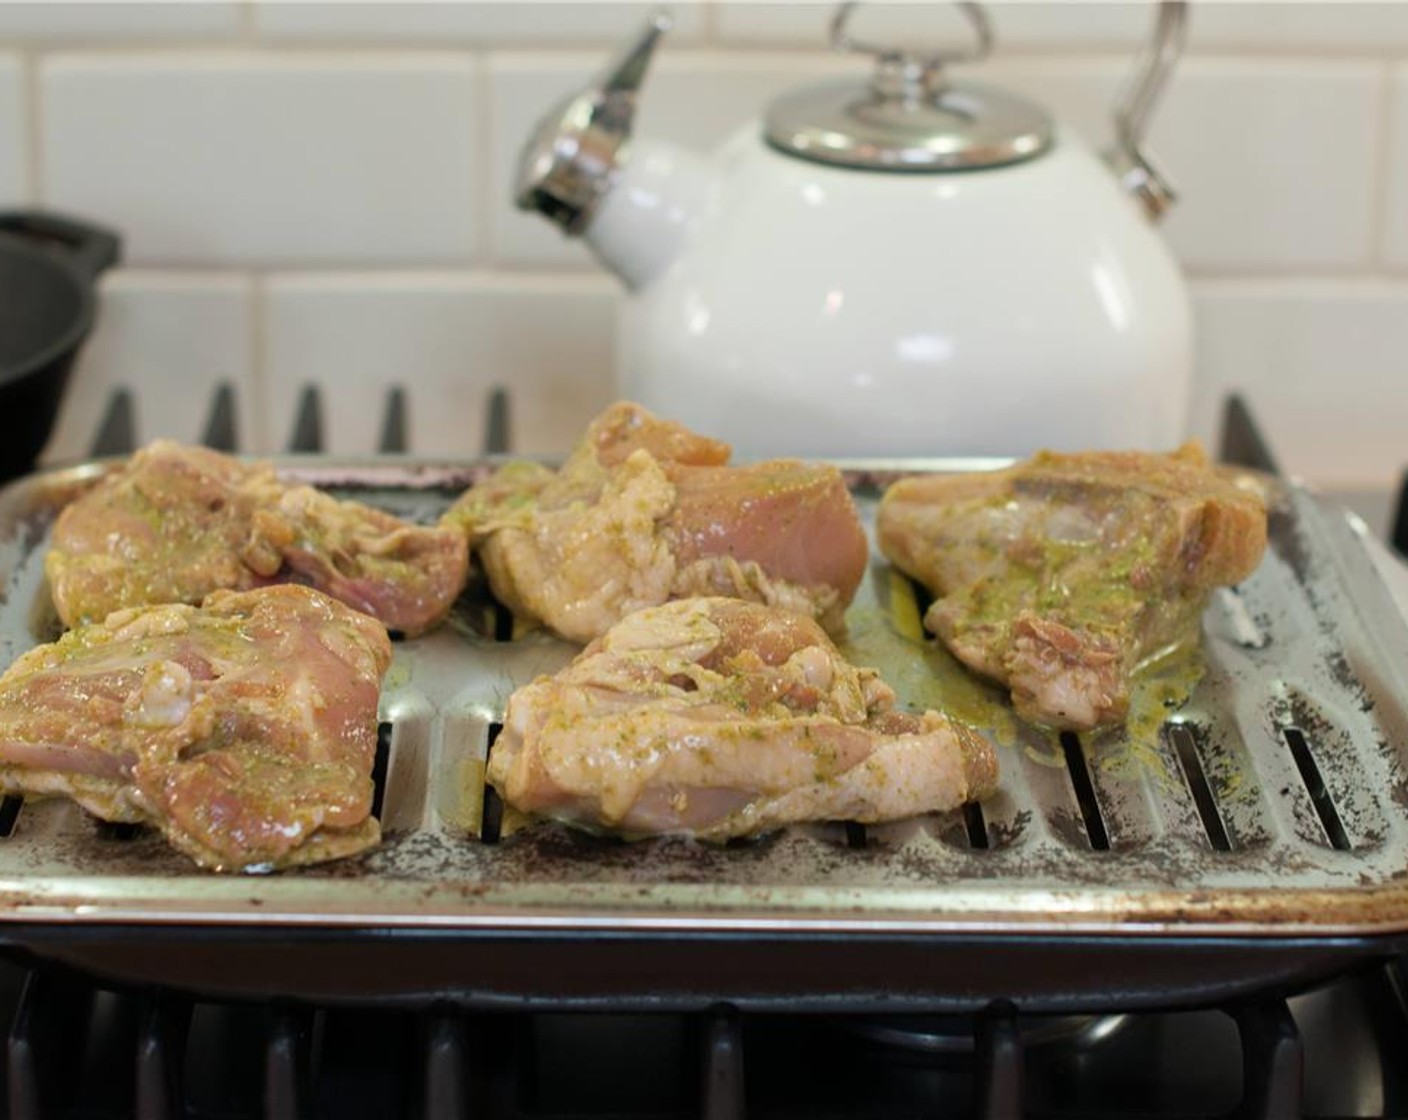 step 5 Place a broiling pan on top of a baking sheet. Remove the chicken from the marinade and place it skin side down on the pan, and place under the broiler and broil until lightly browned on the bottom, about 5 minutes.